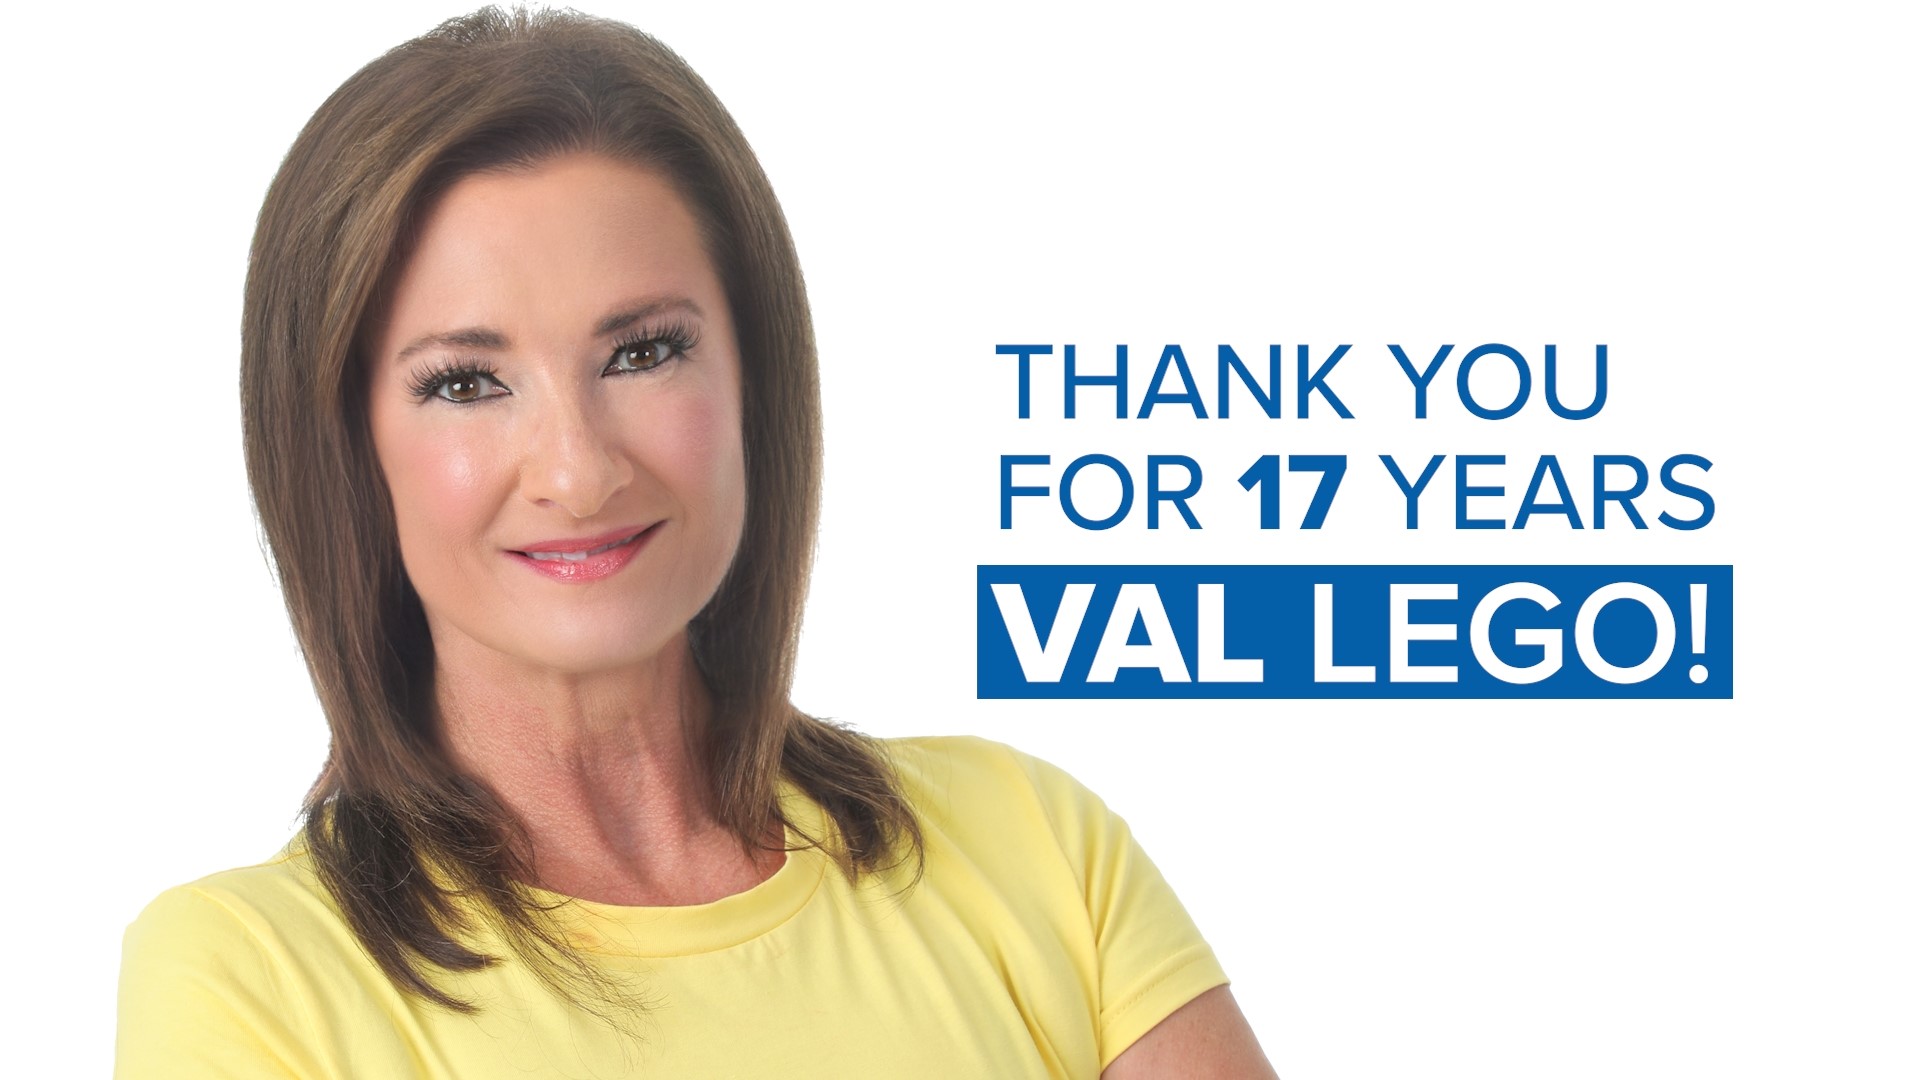 After an incredible career, we're saying goodbye to the irreplaceable Val Lego and executive producer Denise Pritchard!